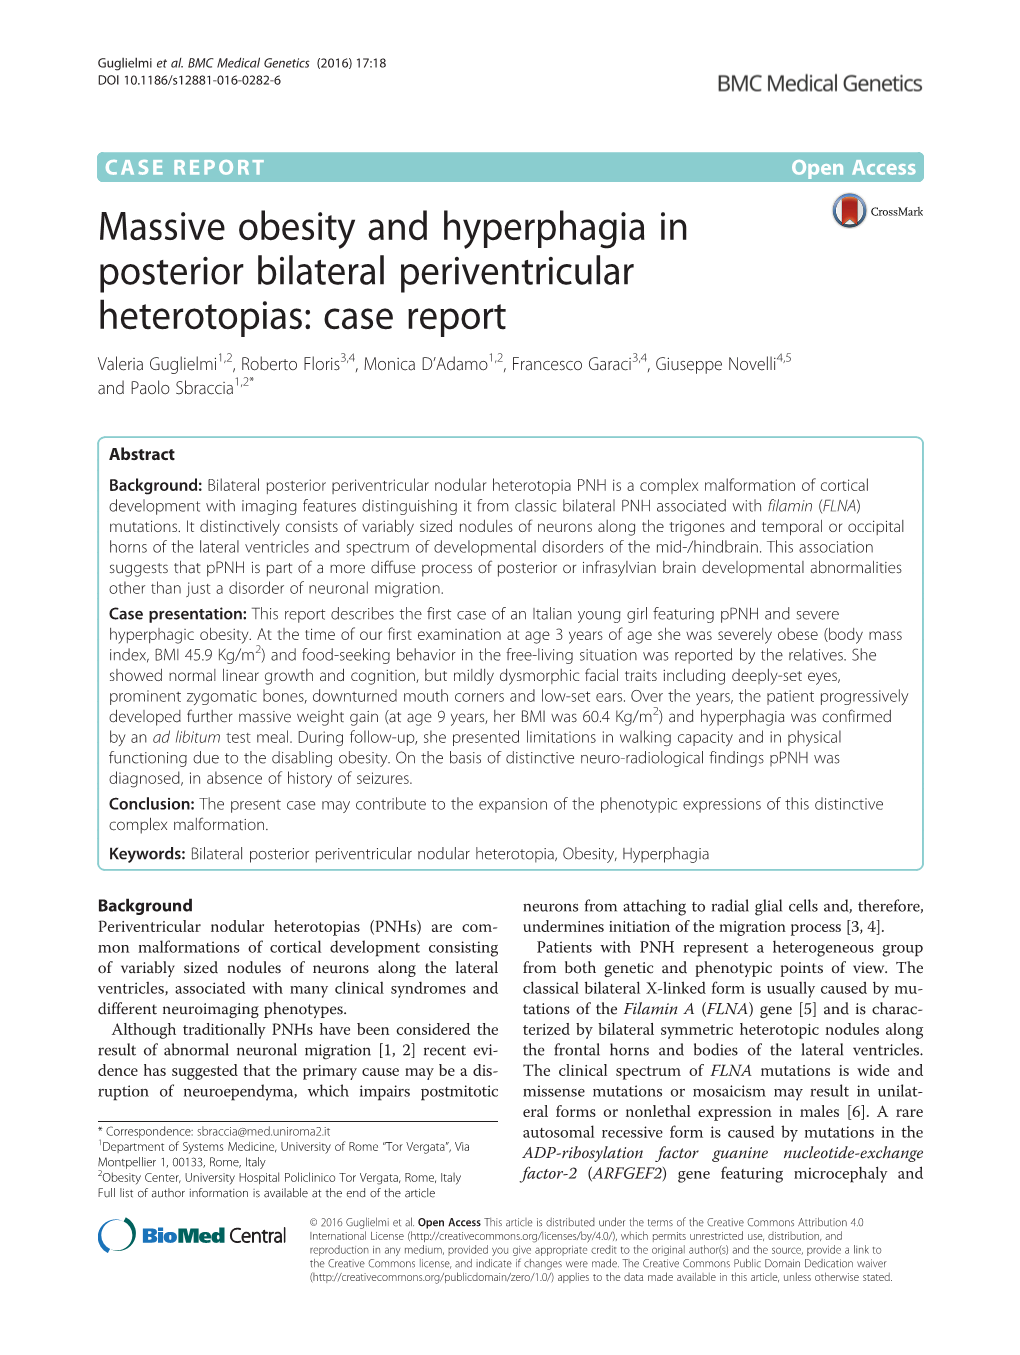 Massive Obesity and Hyperphagia in Posterior